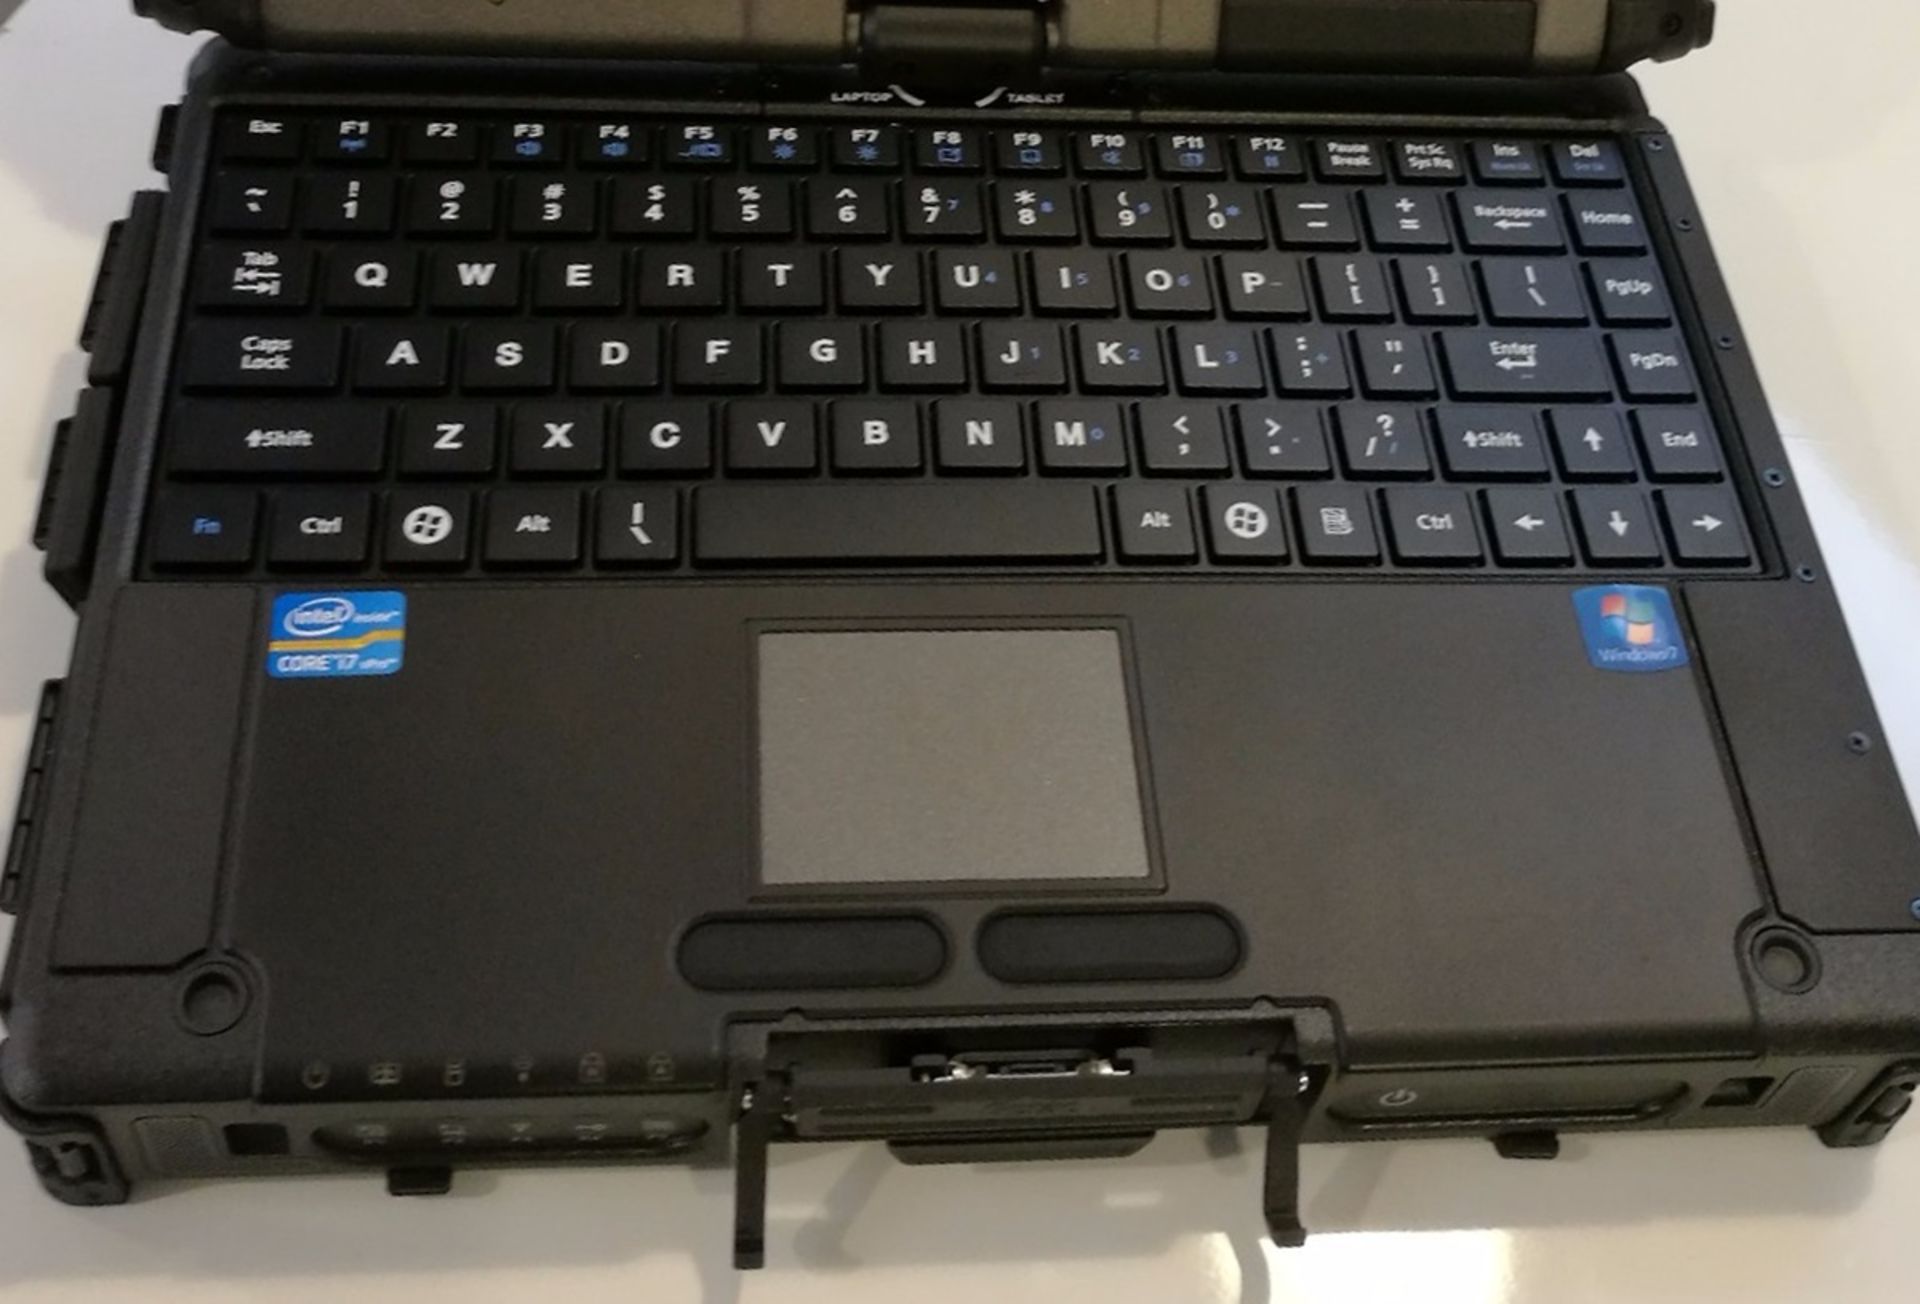 1 x Getac V200 Rugged Laptop Computer - Rugged Laptop That Transforms into a Tablet PC - Features an - Image 15 of 15